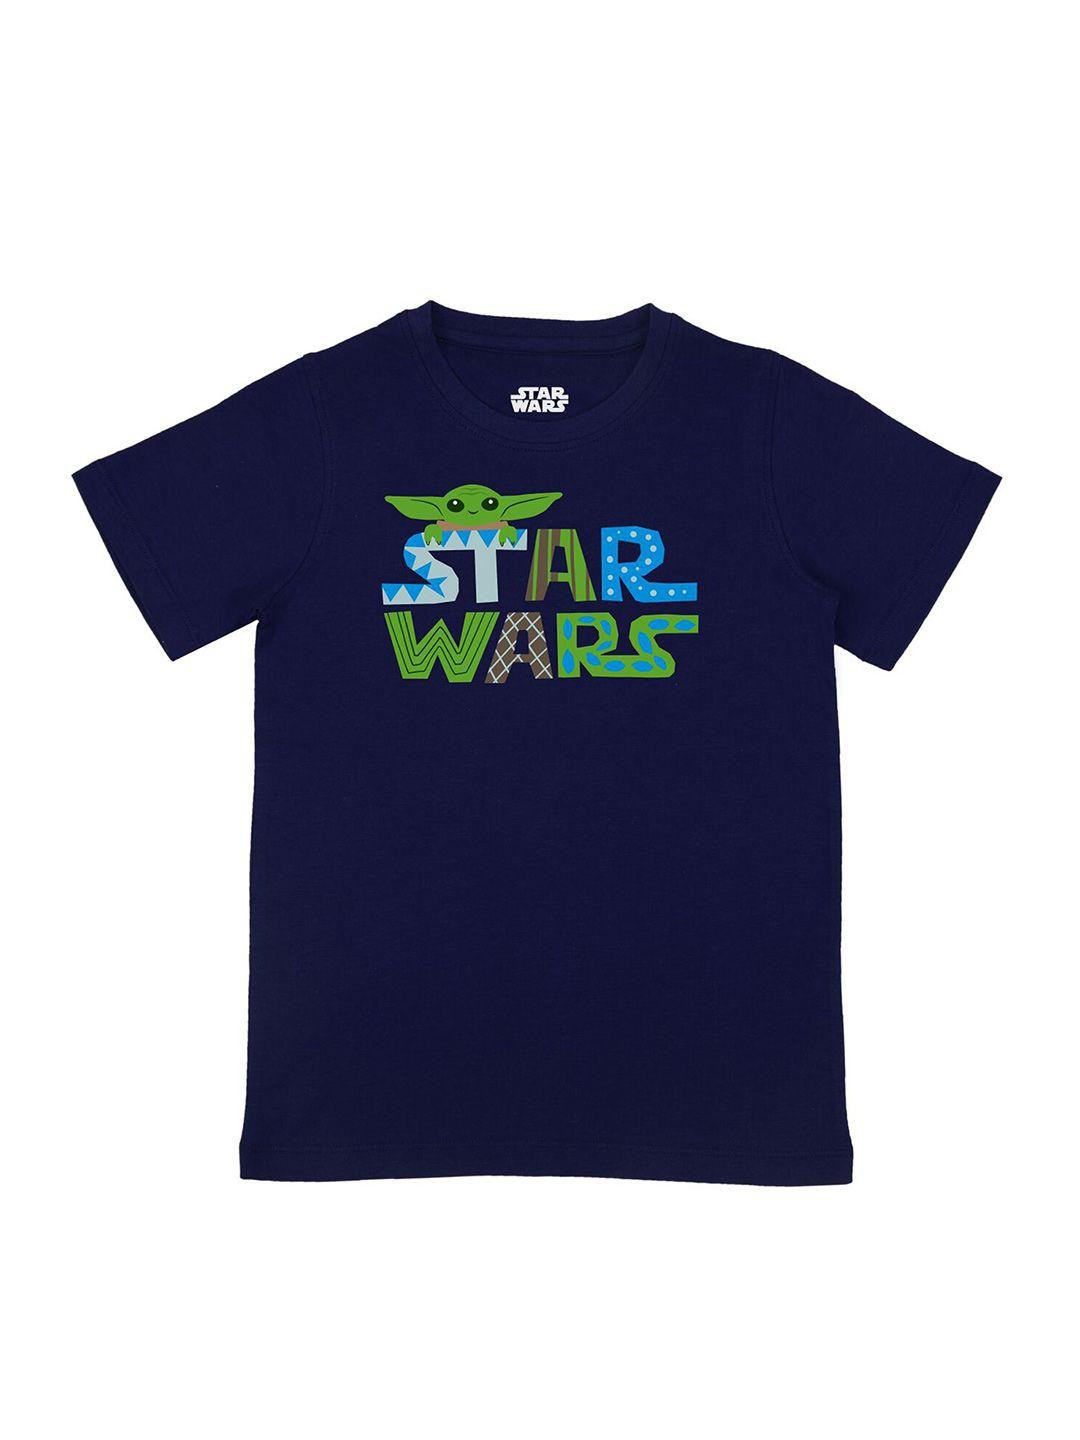 star-wars-by-wear-your-mind-boys-navy-blue-typography-star-wars-printed-t-shirt